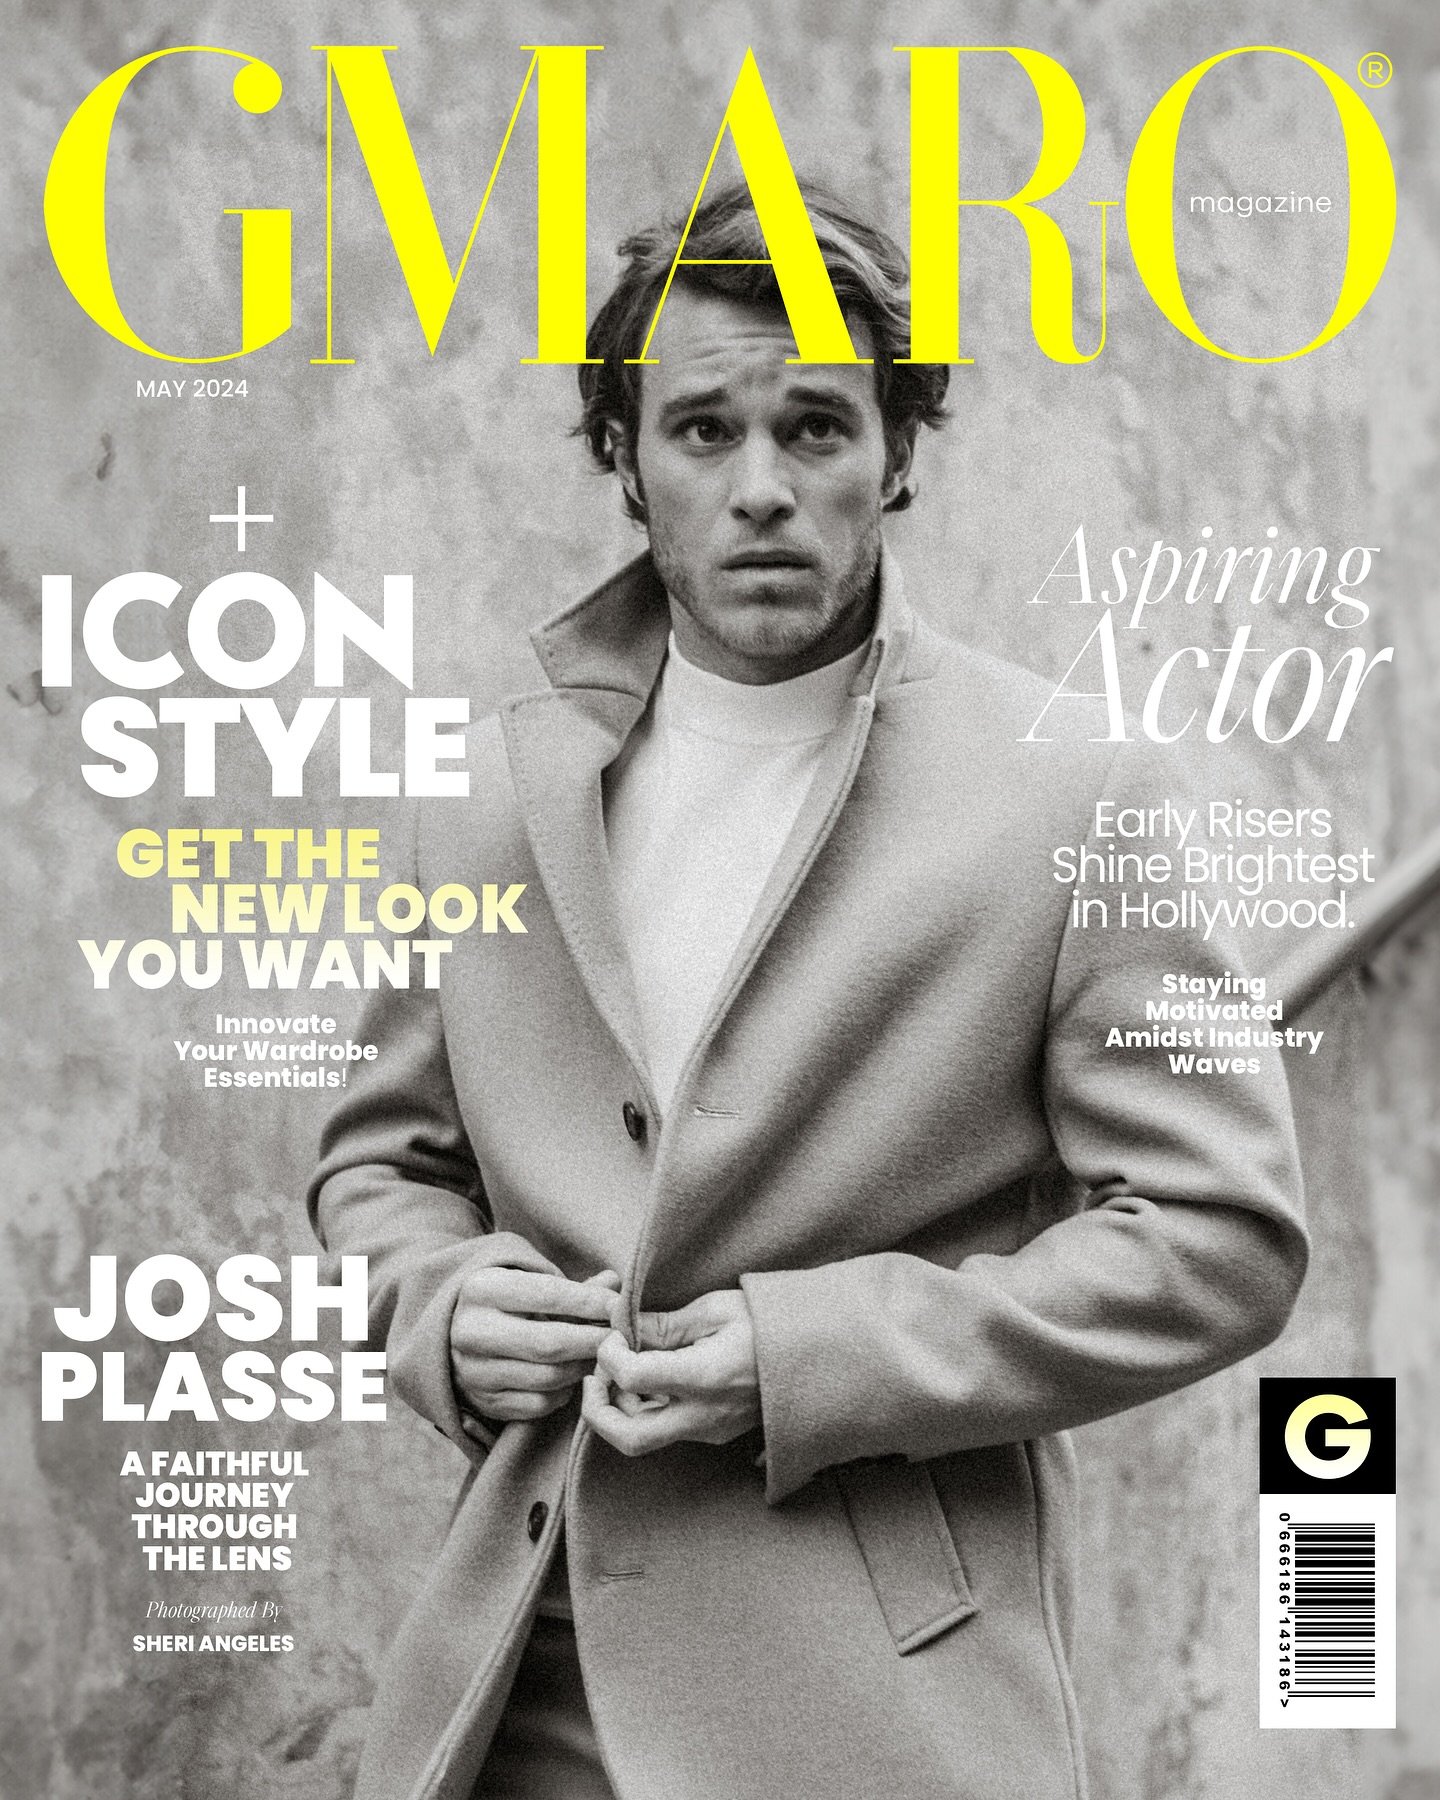 Dive into the world of Josh Plasse in GMARO Magazine Celebrity Edition Vol.51 May 2024. As an actor, boxer, writer, and producer, Josh embodies the spirit of a Renaissance man. From his roots as the son of a US Navy Seal to his Golden Gloves champion